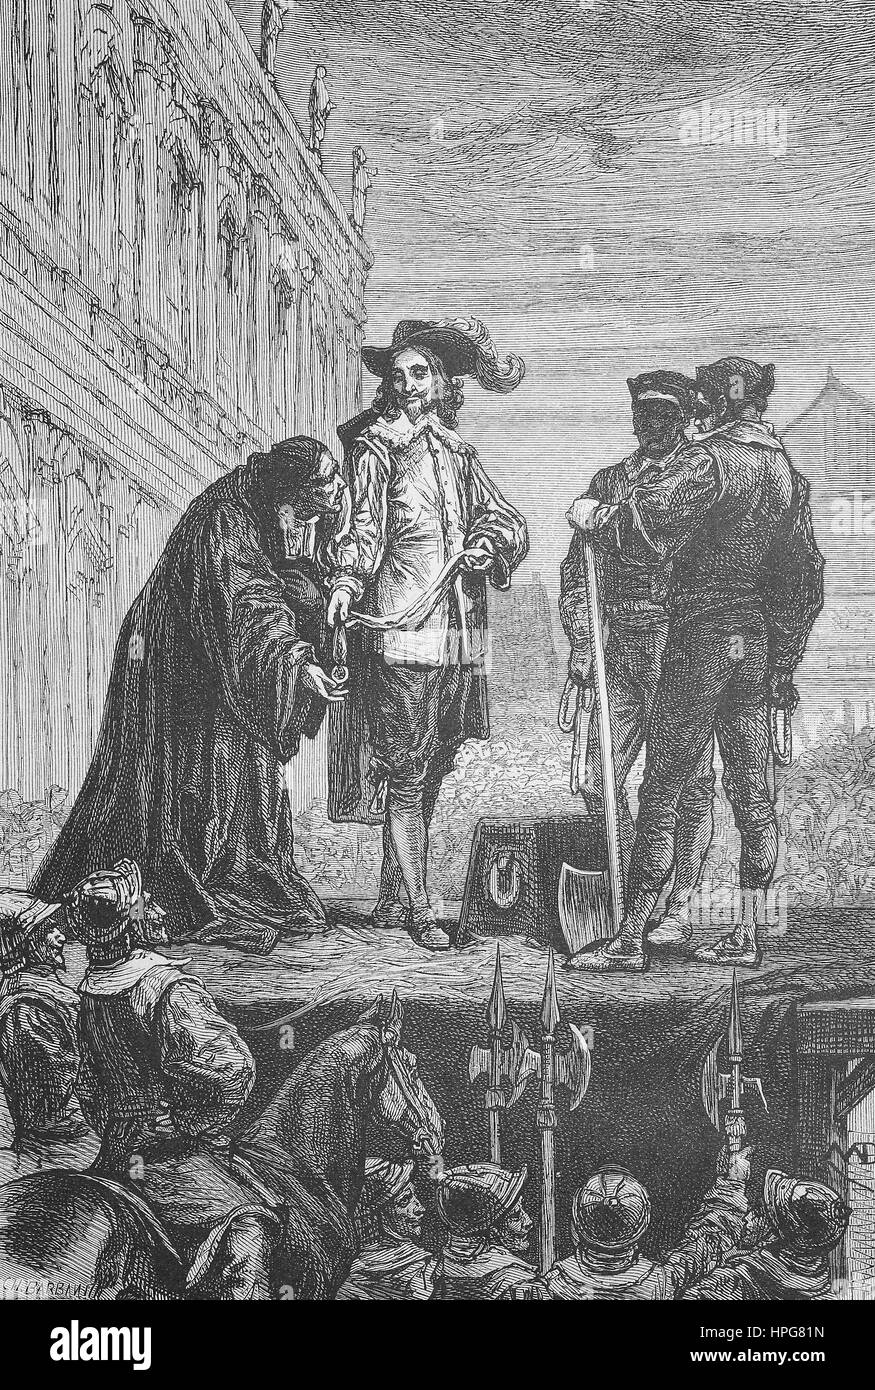 Charles I's beheading, Charles I, 1600 - 1649, was monarch of the three kingdoms of England, Scotland, and Ireland from 27 March 1625 until his execution in 1649, digital improved reproduction of a woodcut from the year 1885 Stock Photo